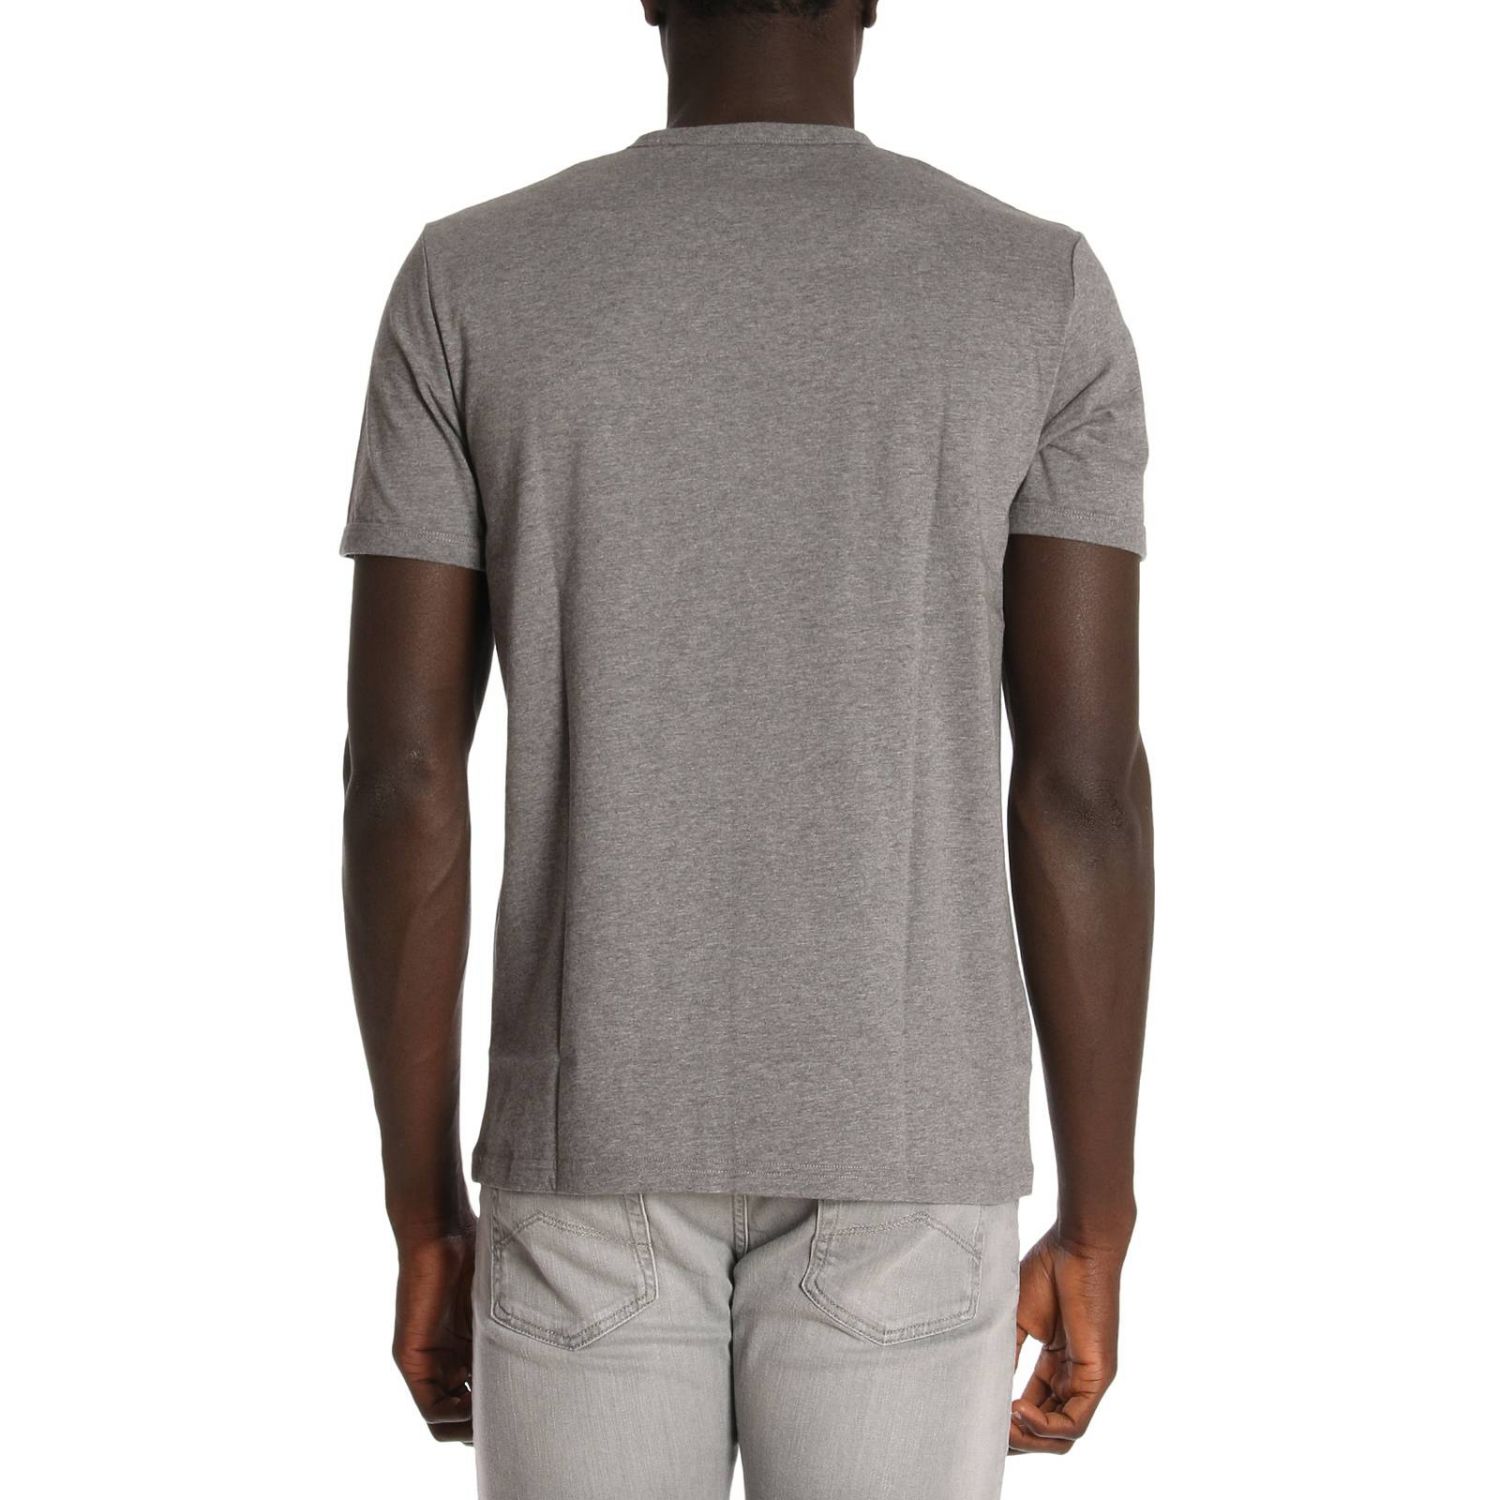 Fred Perry Outlet: T-shirt men | T-Shirt Fred Perry Men Grey | T-Shirt ...